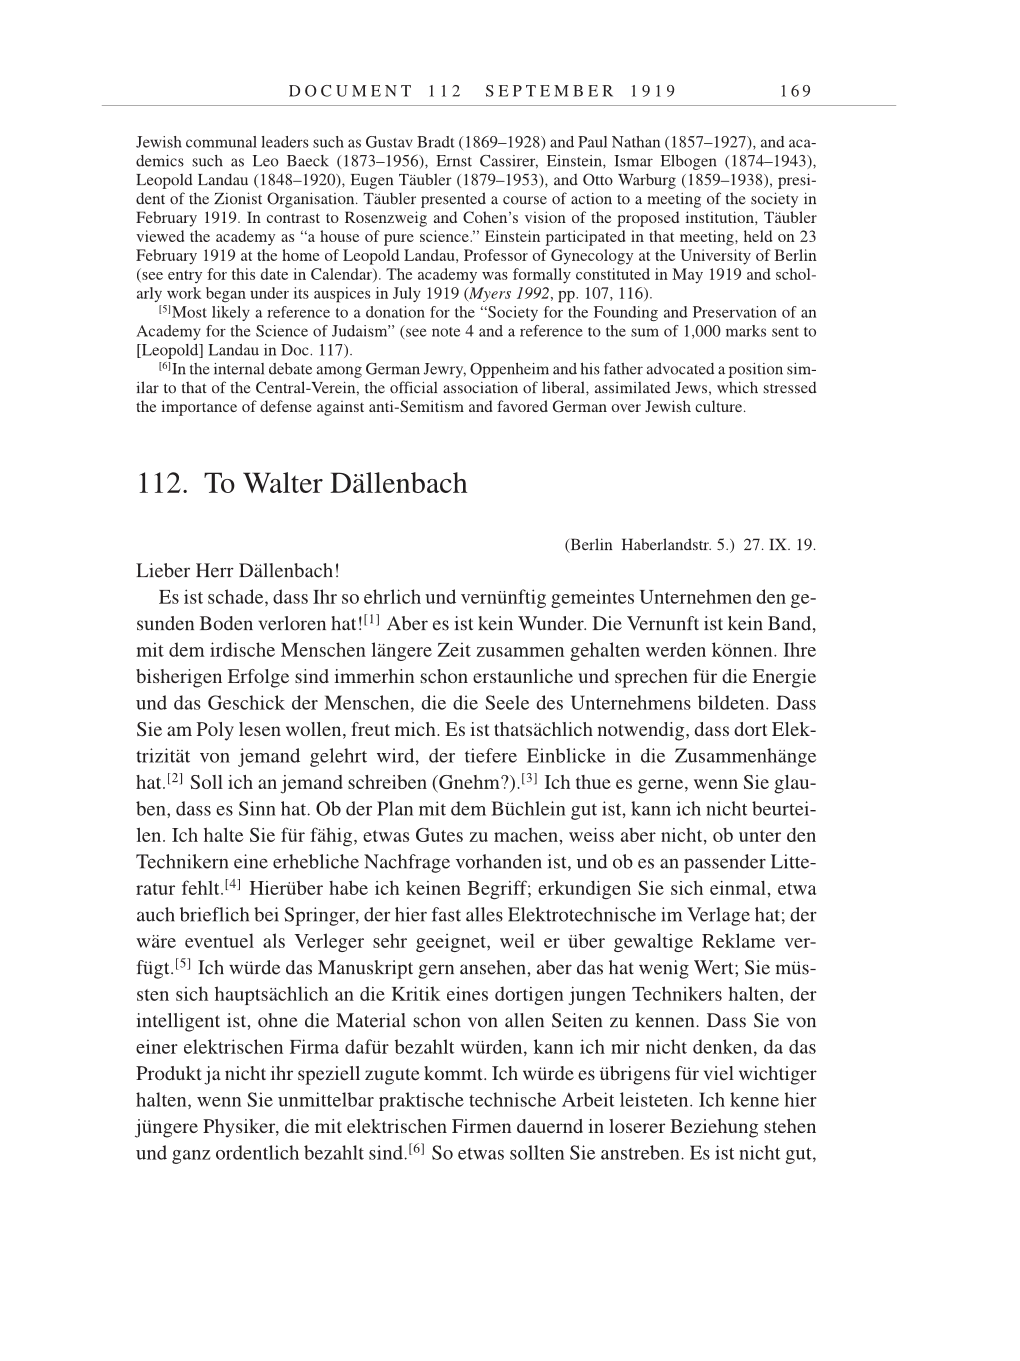 Volume 9: The Berlin Years: Correspondence January 1919-April 1920 page 169